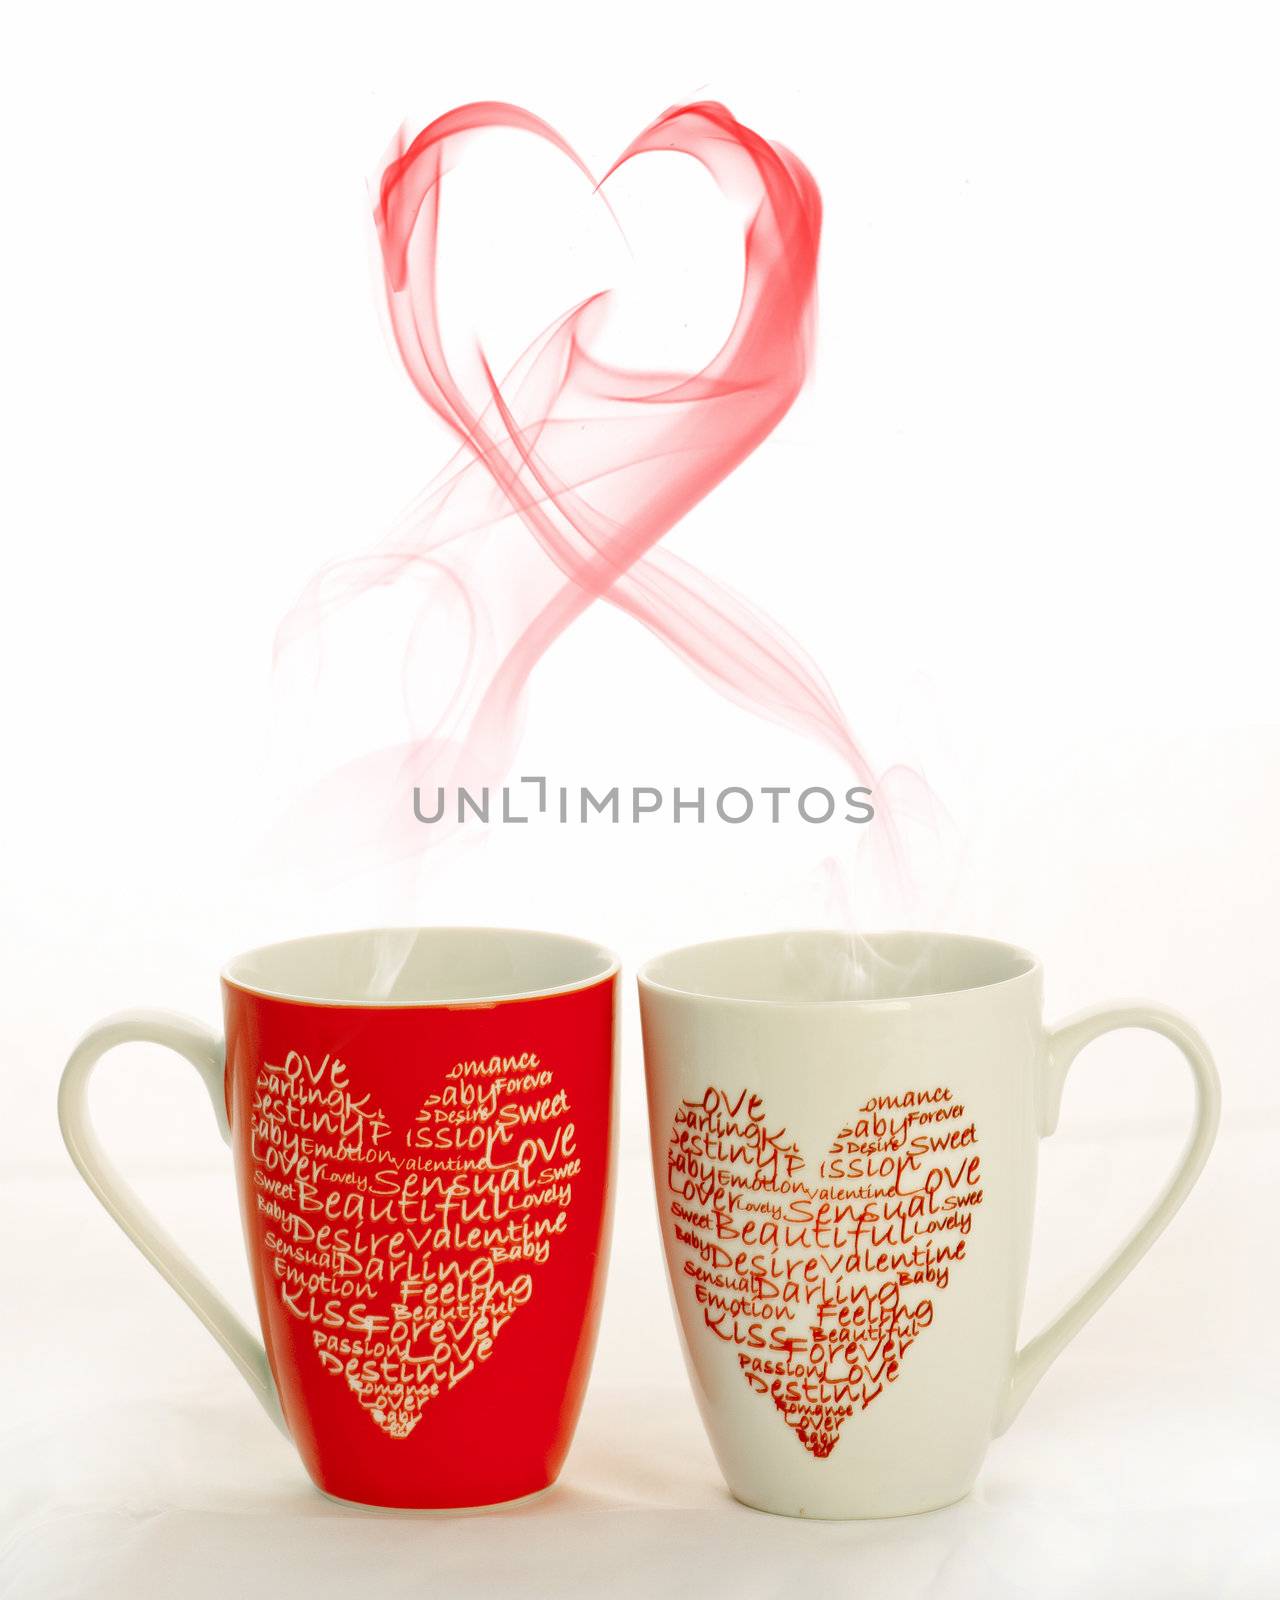 2 coffee cups with hearts creating smoke in the shape of a heart on a white background